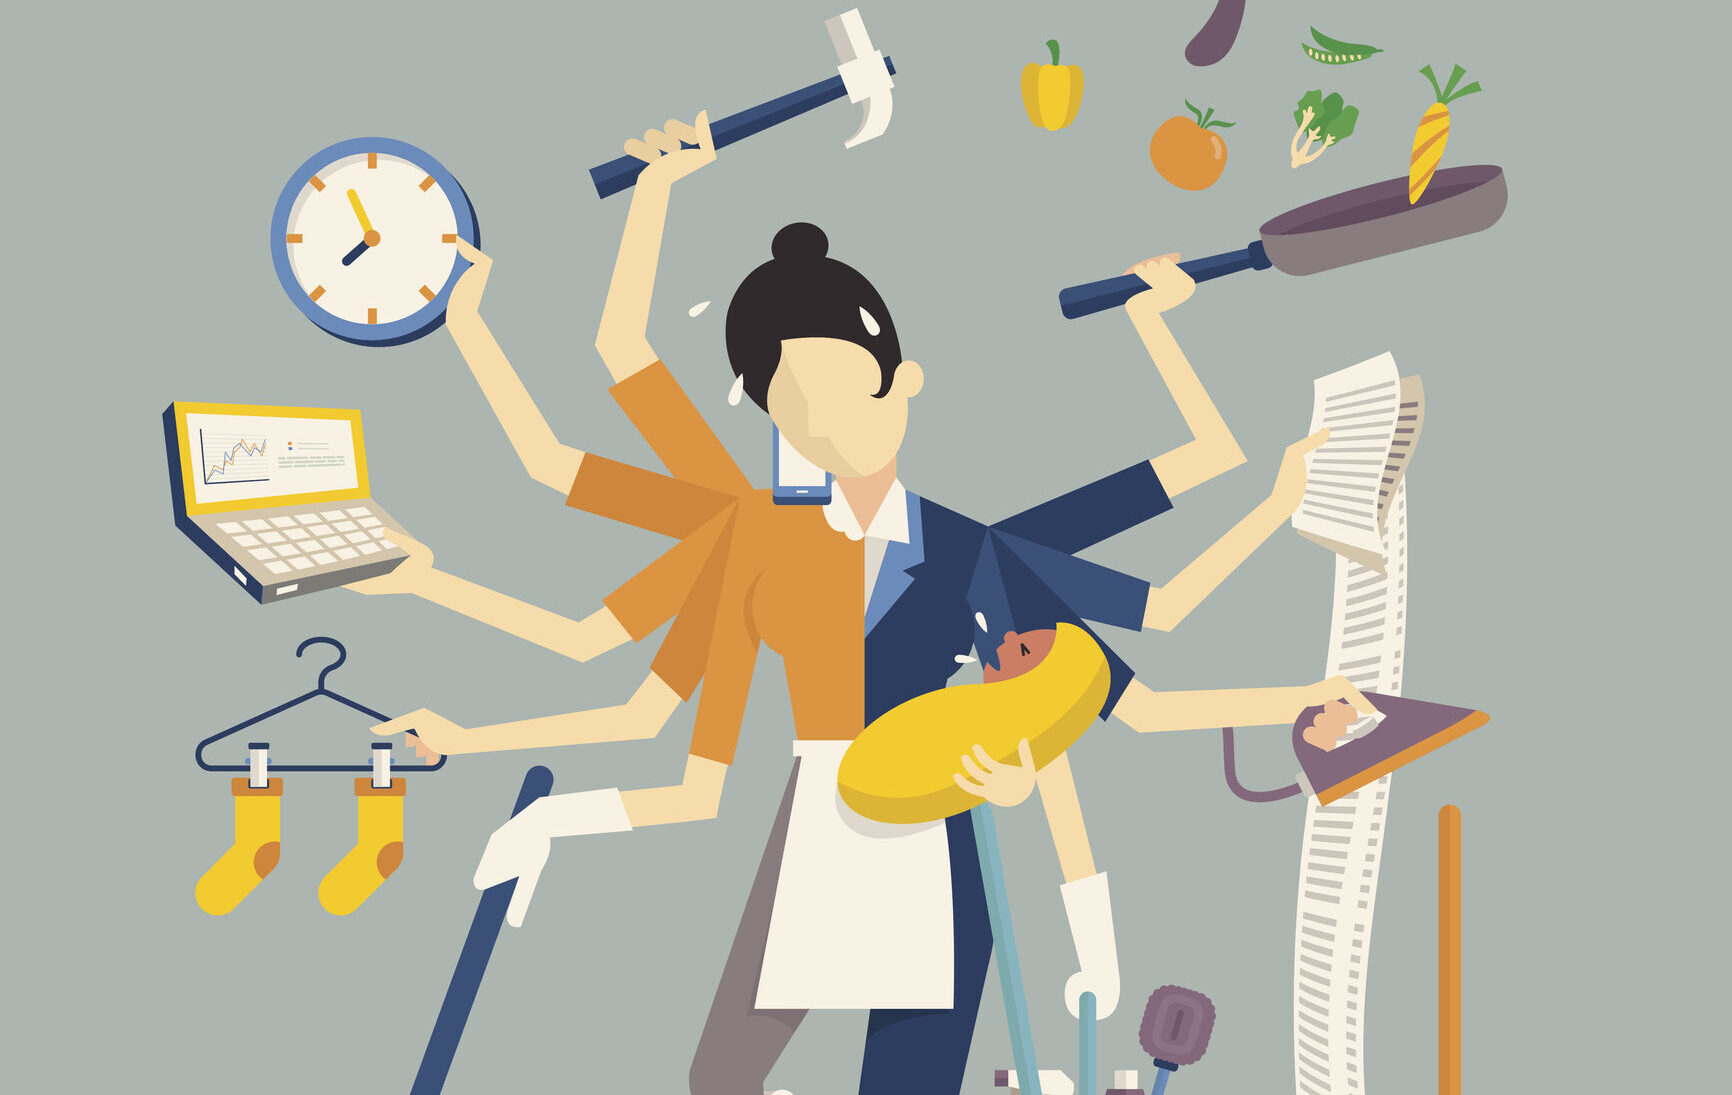 Vector illustration in super mom concept, many hands working with very busy business and housework part, feeding baby, cleaning house, cooking, doing washing, working with laptop. Flat design.